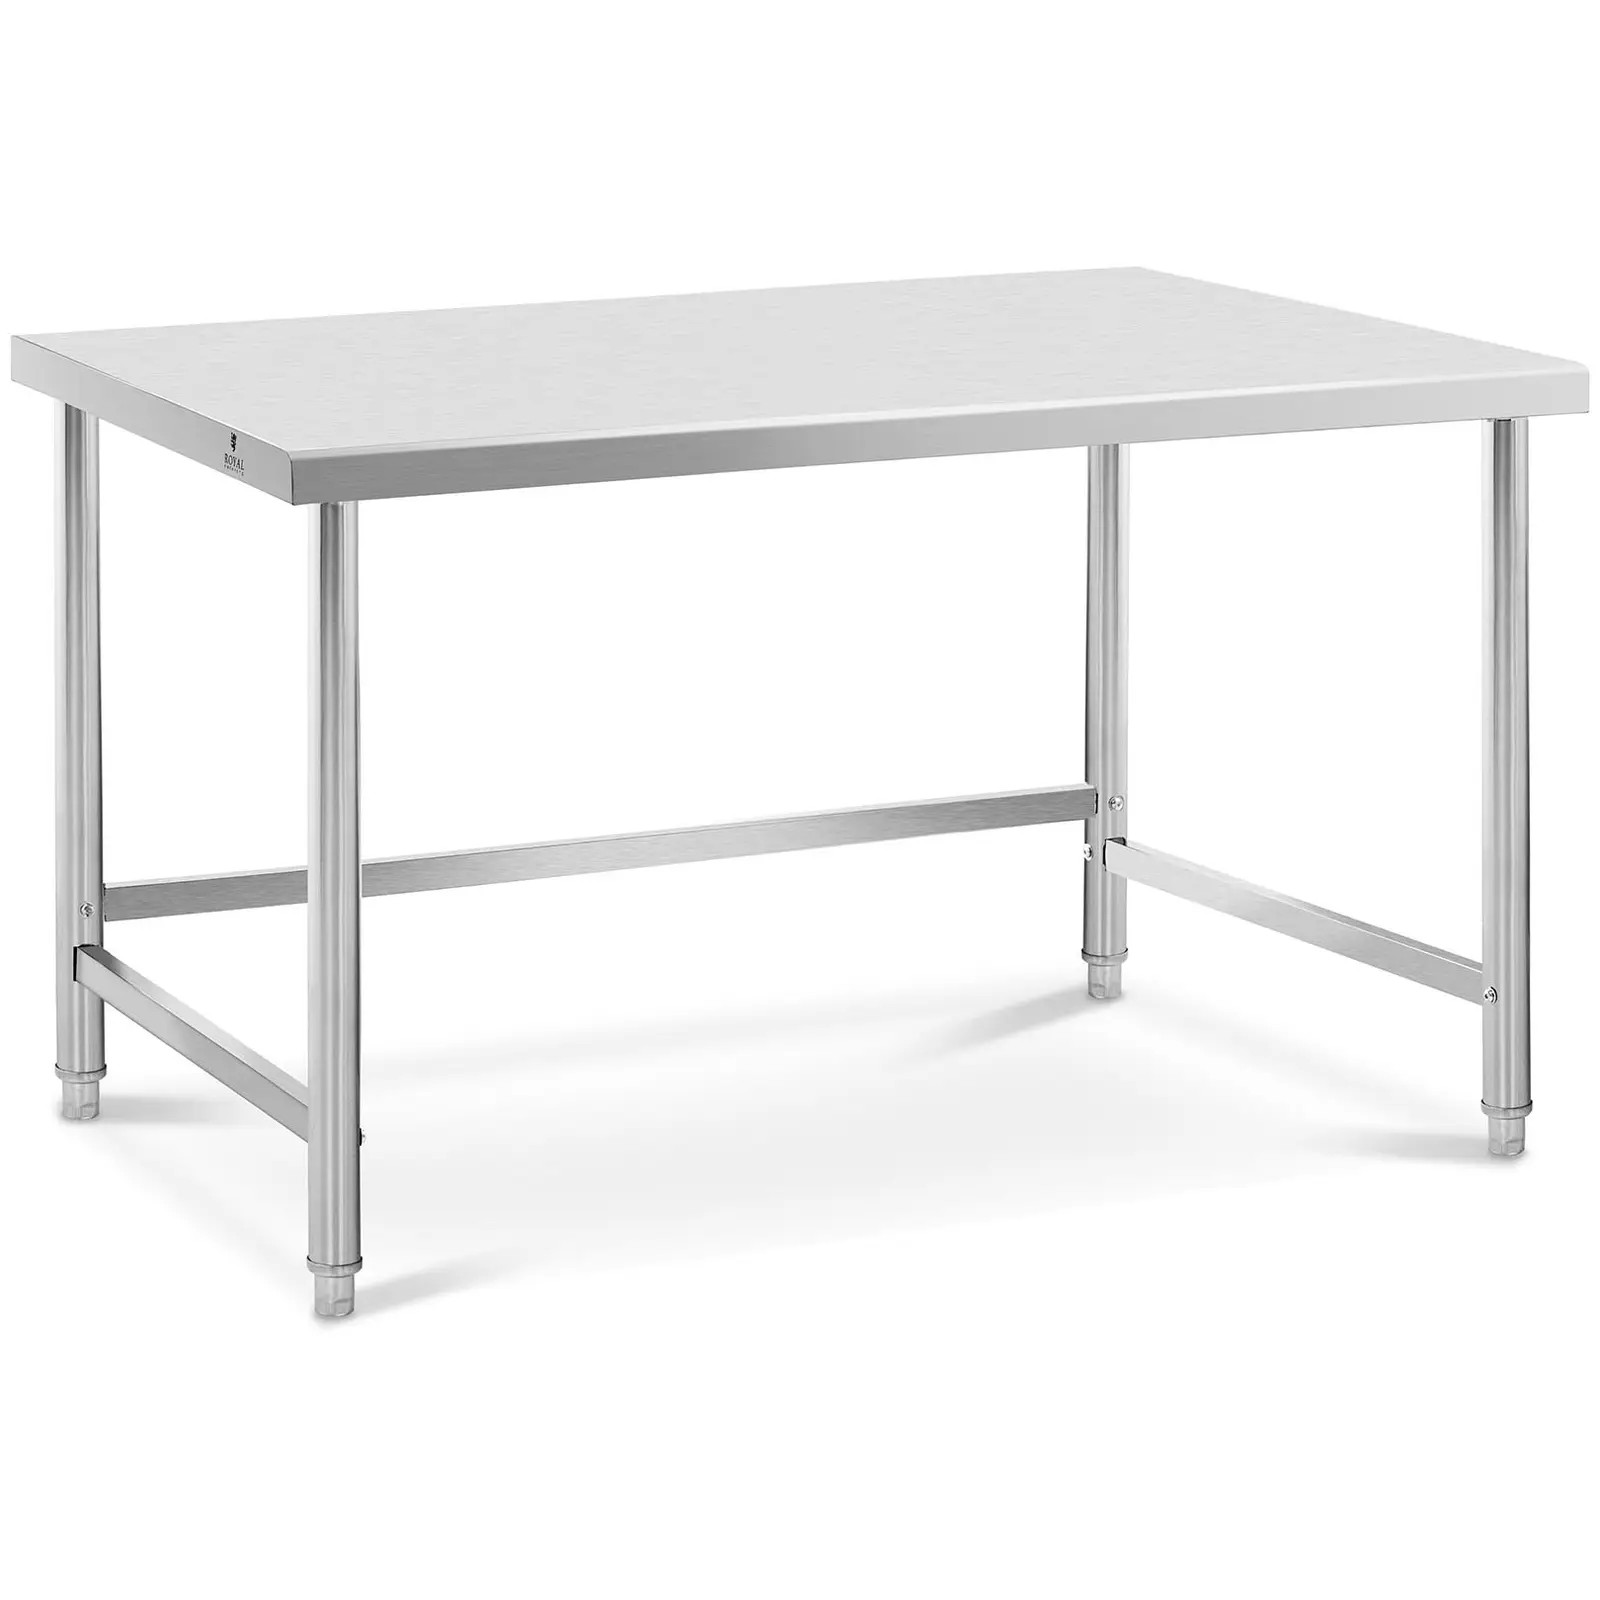 Stainless steel table - 120 x 90 cm - 95 kg load capacity - Royal Catering